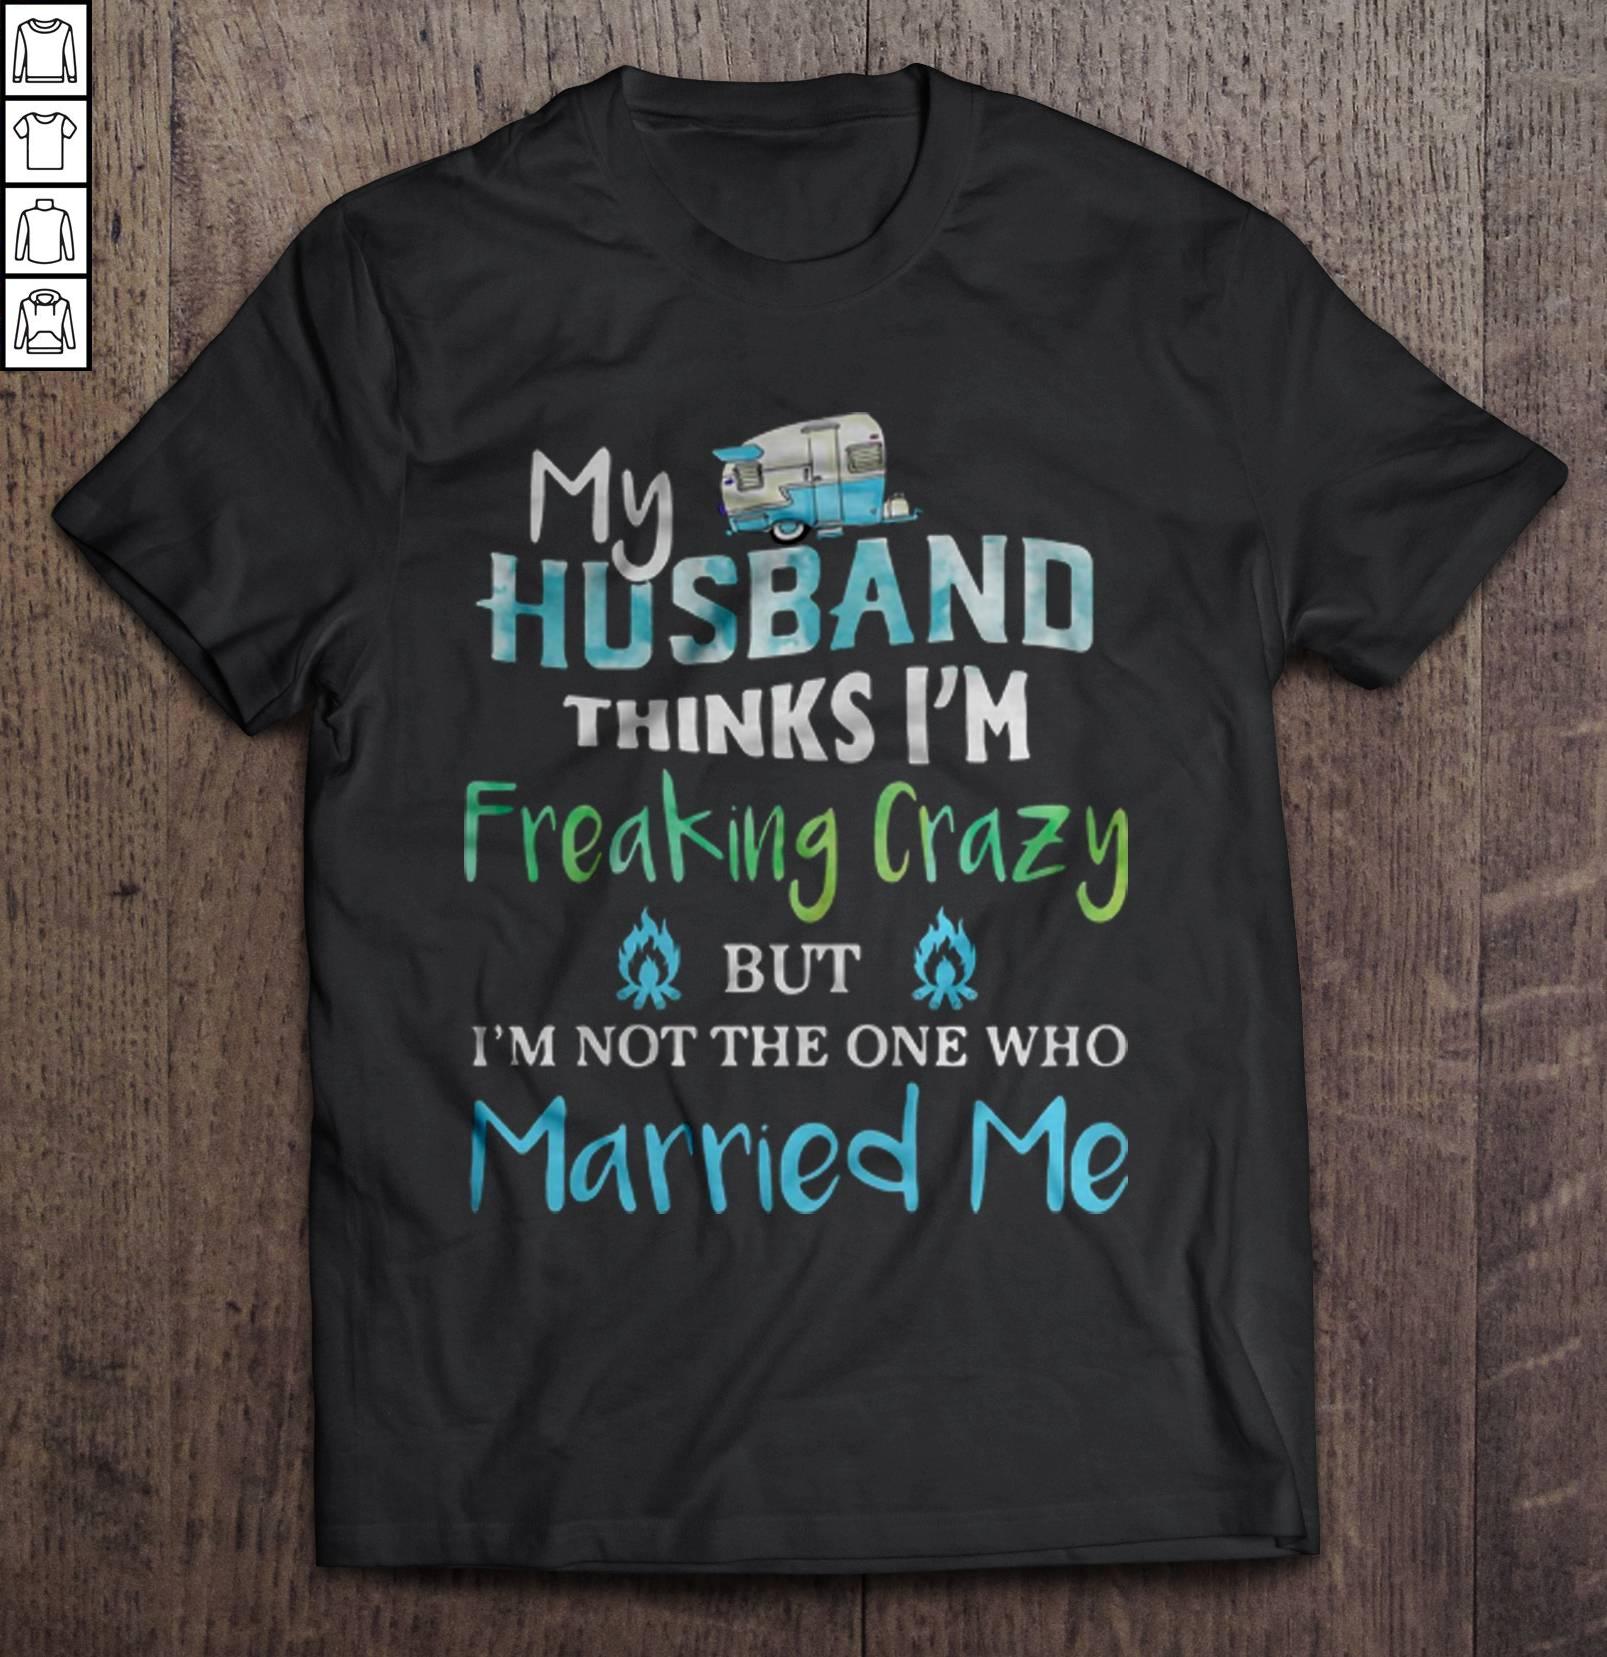 My Husband Thinks I’m Freaking Crazy But I’m Not The One Who Married Me Sky Blue Shirt